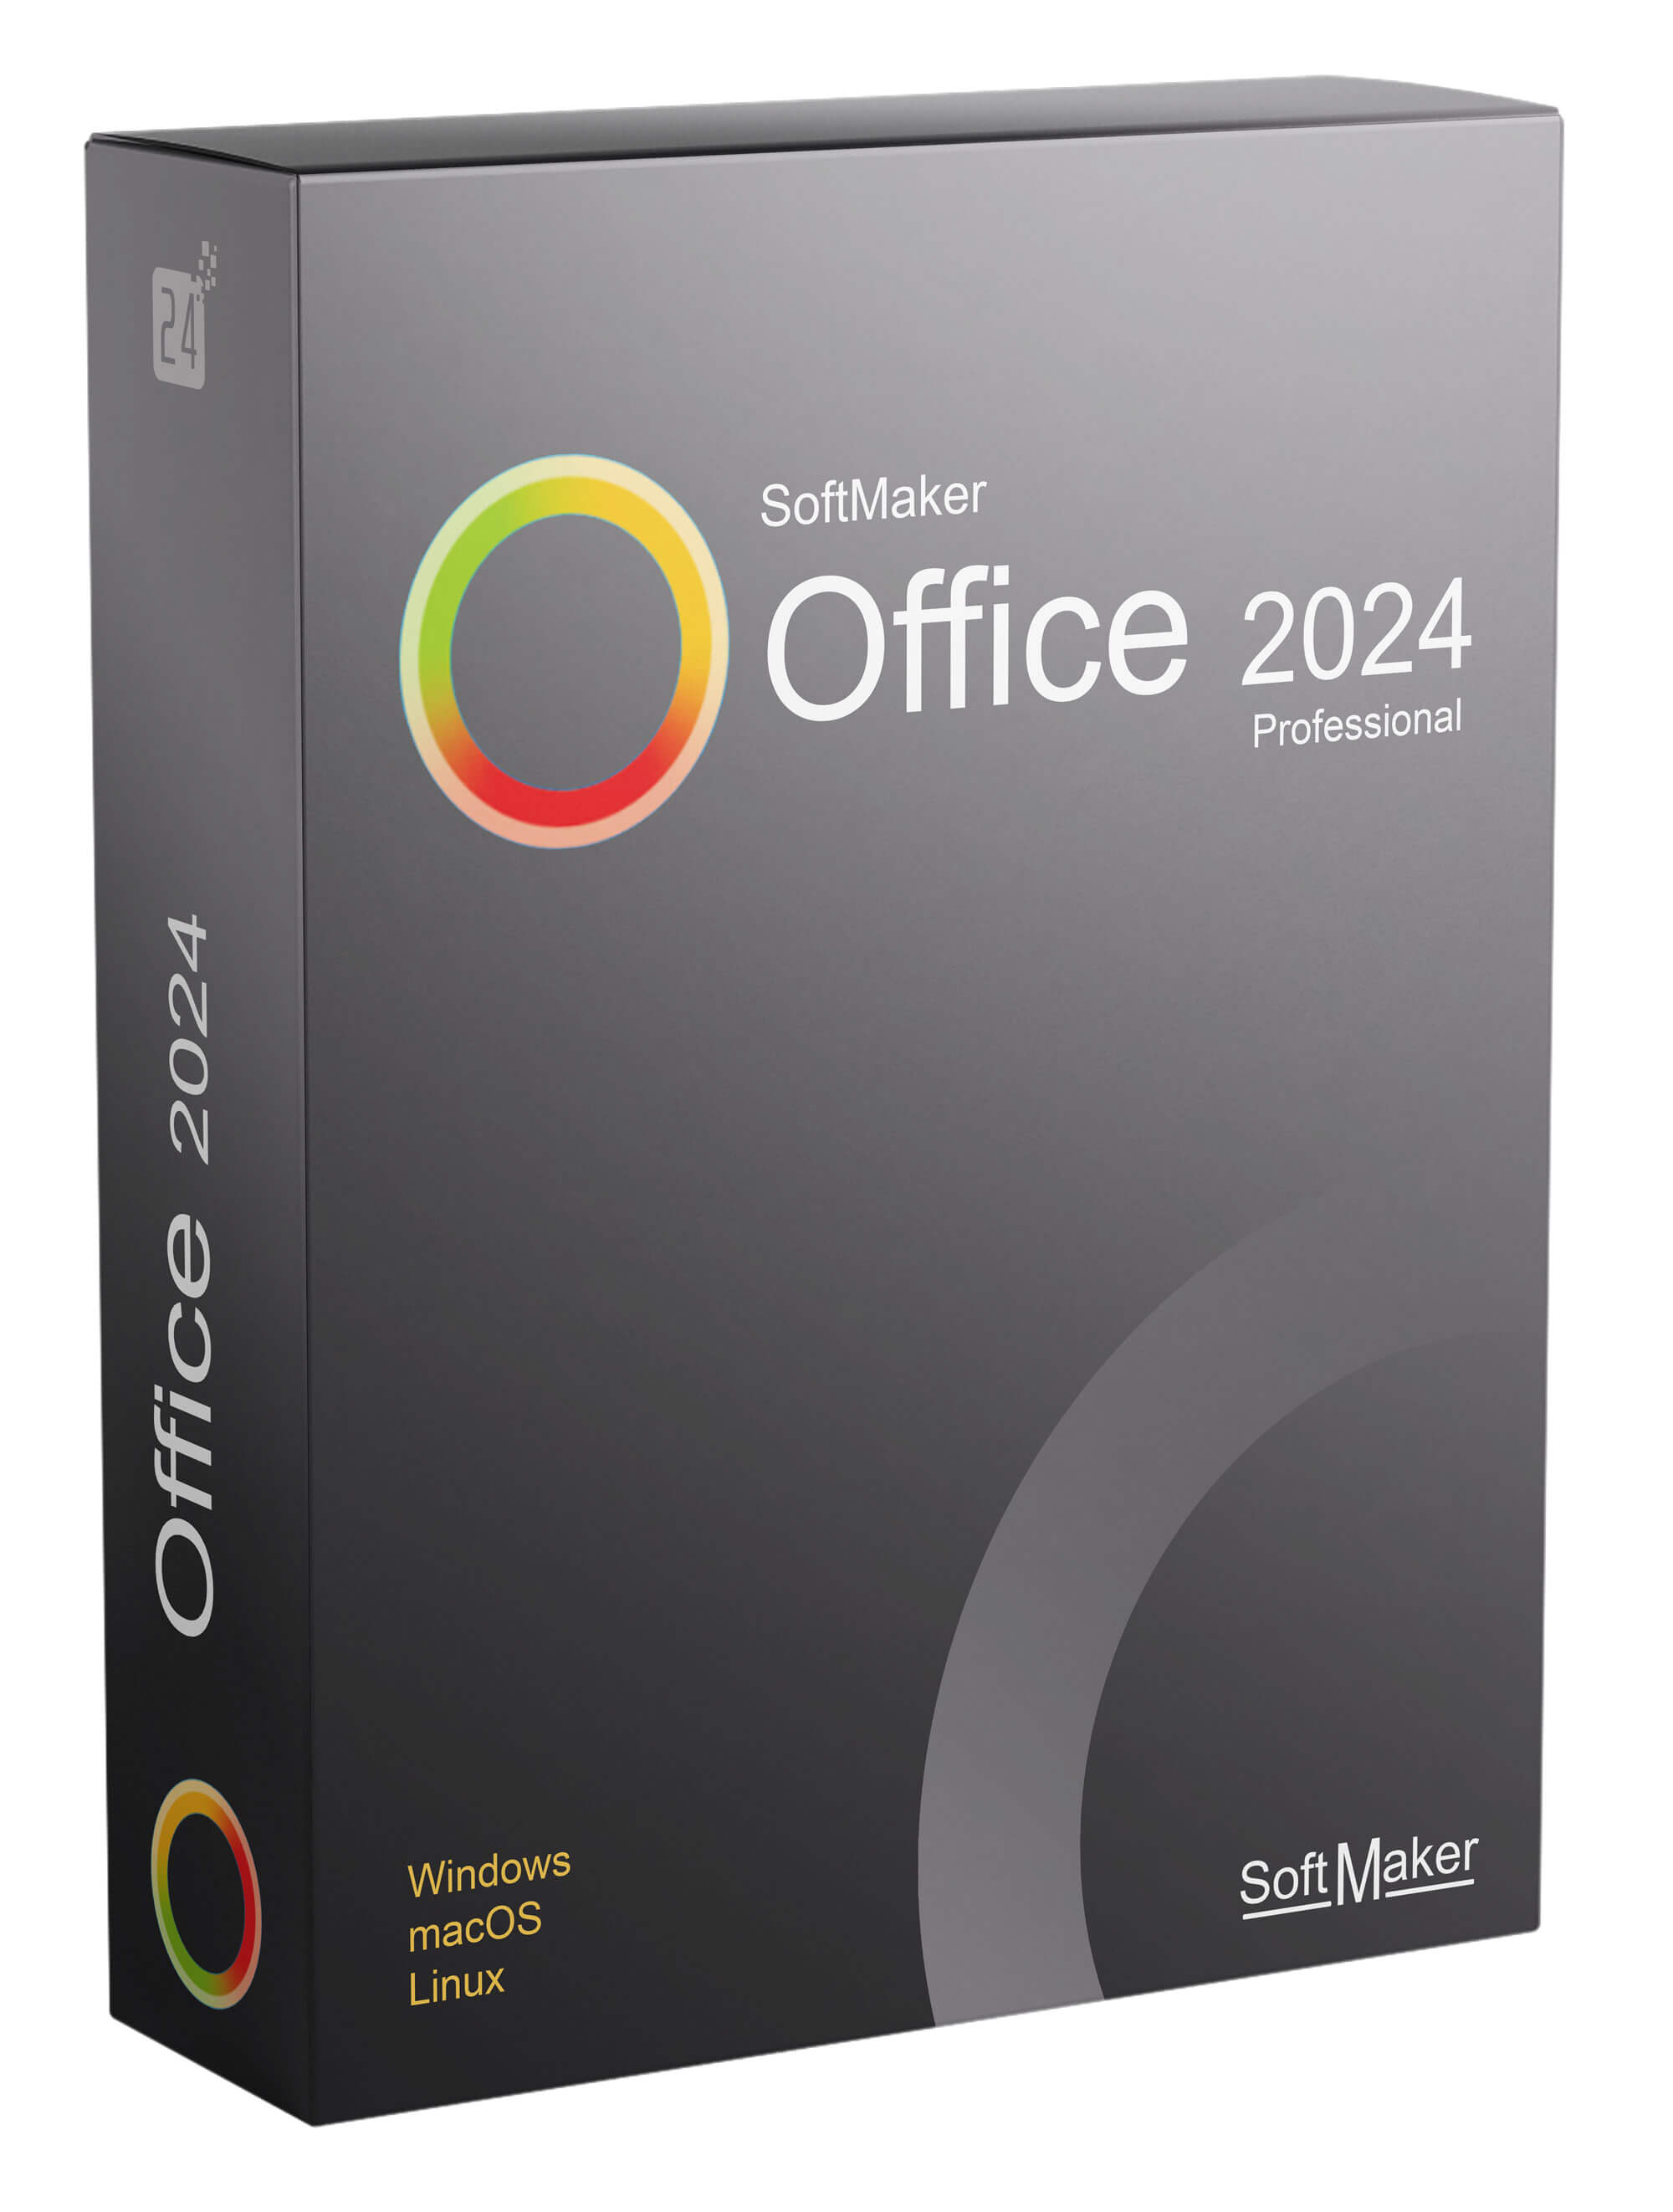 SoftMaker Office Professional 2024 rev.1204.0902 for ipod download